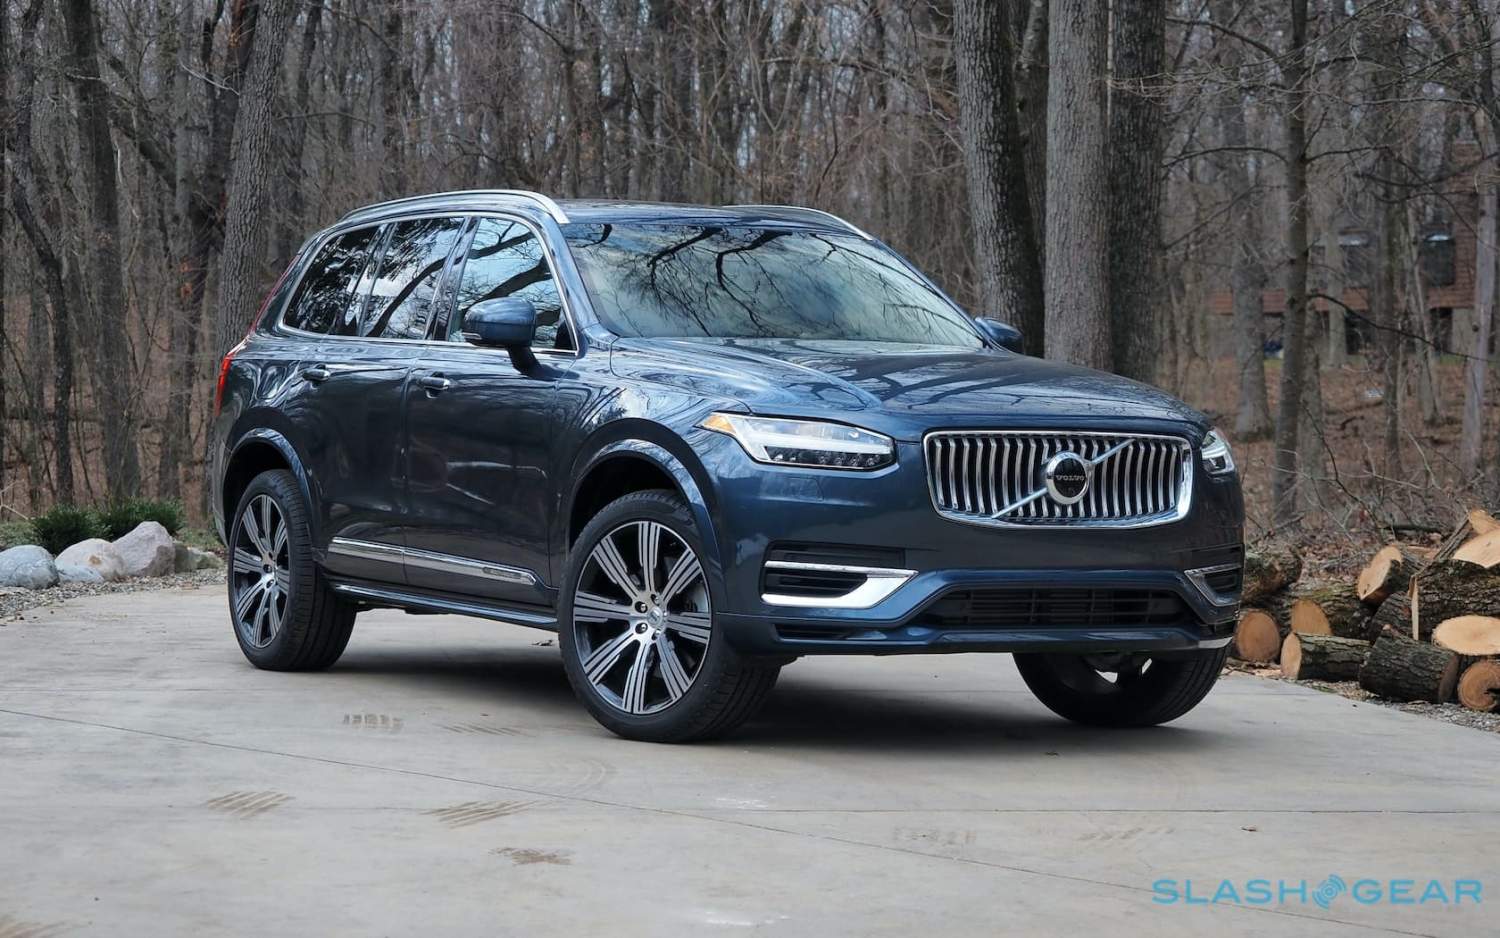 2021 Volvo XC90 T8 Recharge Review – Luxury first, hybrid second